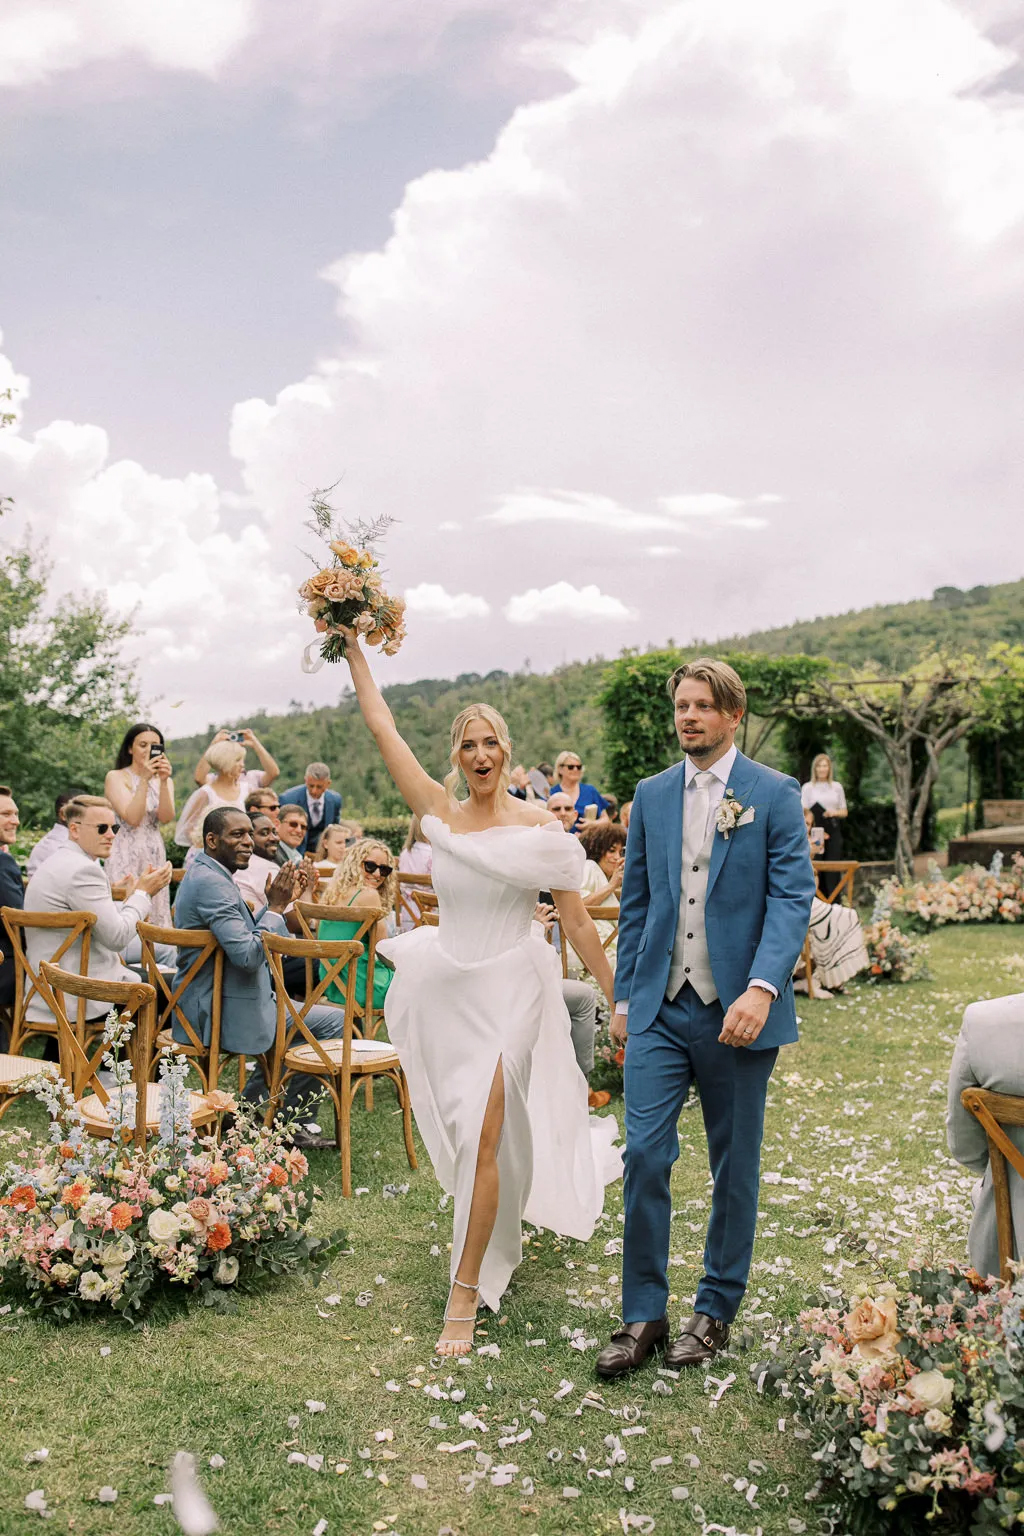 The Ultimate List of Wedding Ceremony Rituals & Traditions